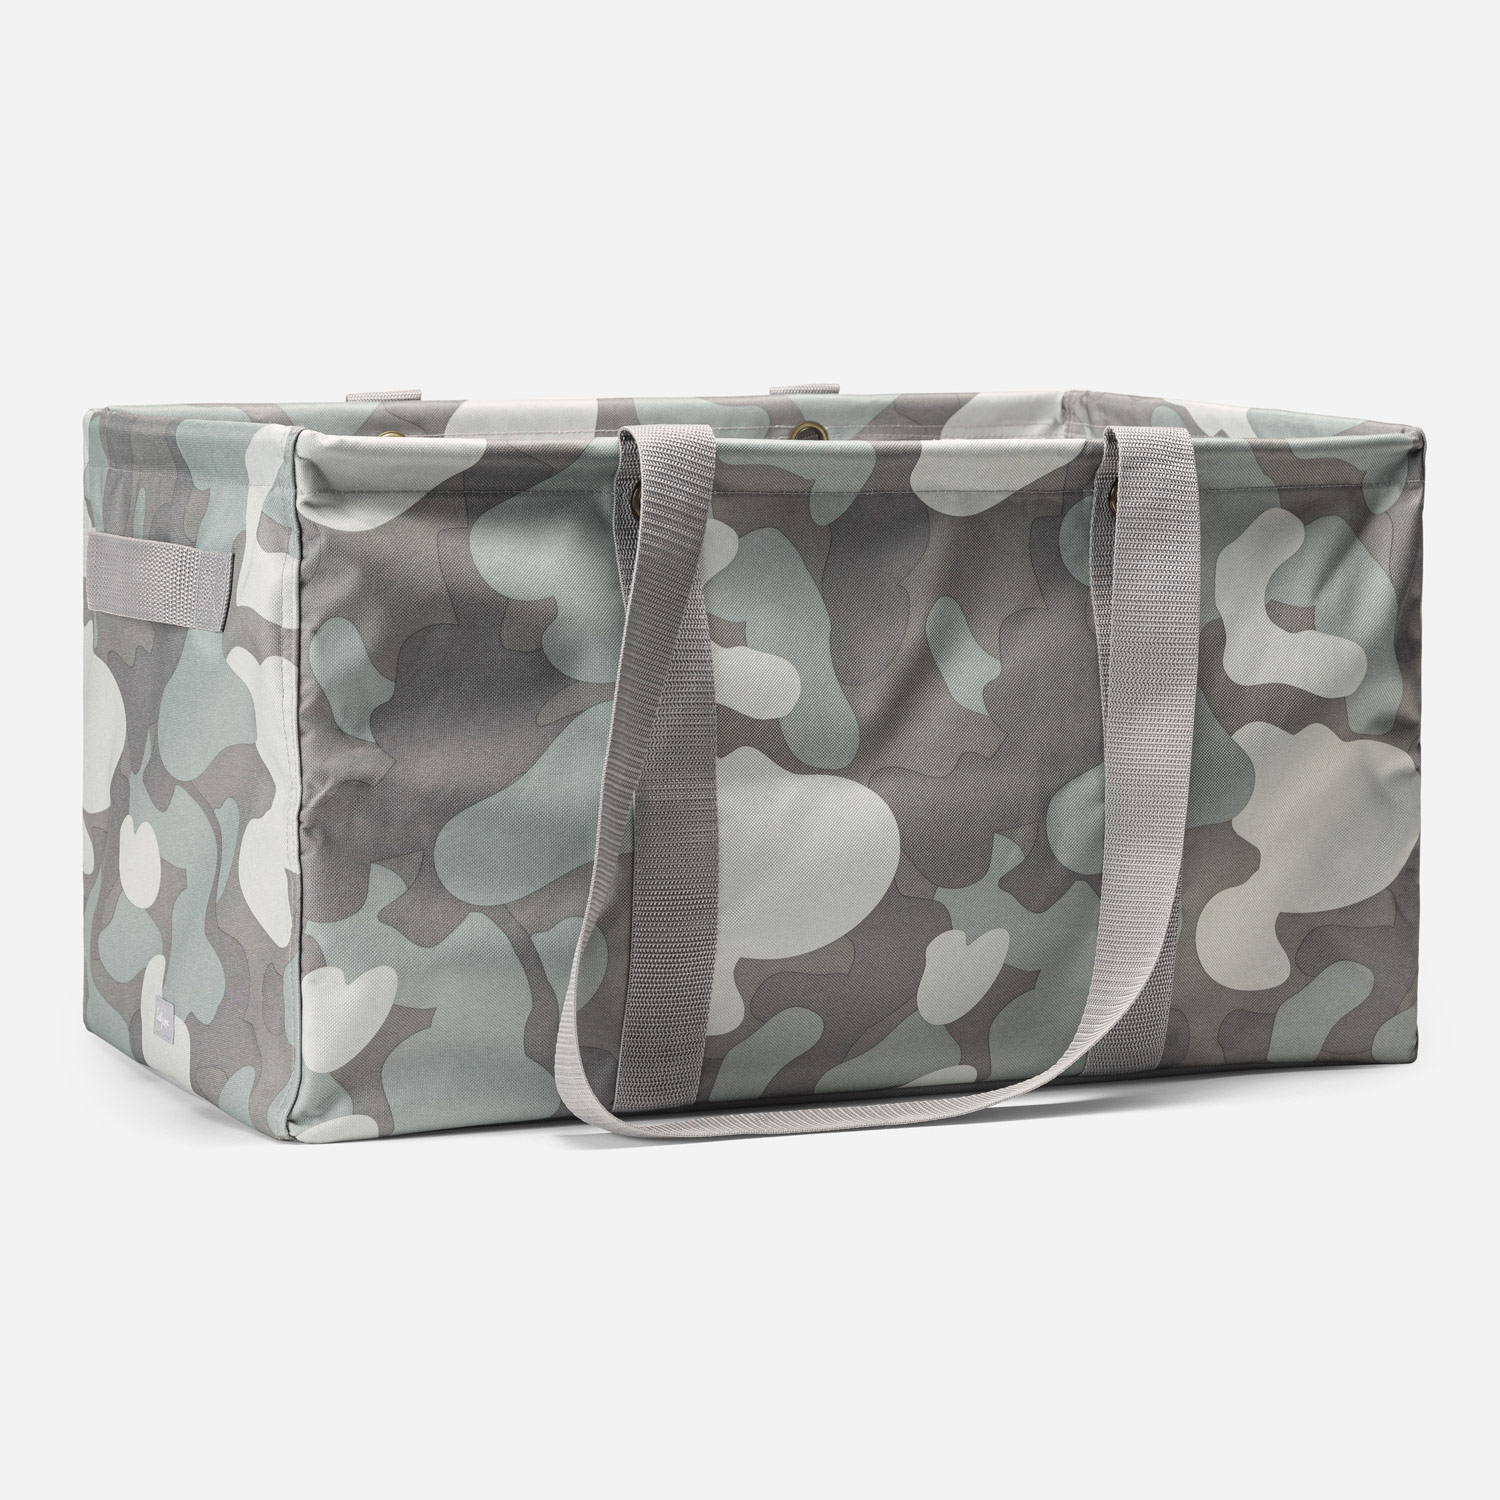 Thirty One 31 LARGE Utility Tote LUT in Camo Crosshatch Package NEW In Package 